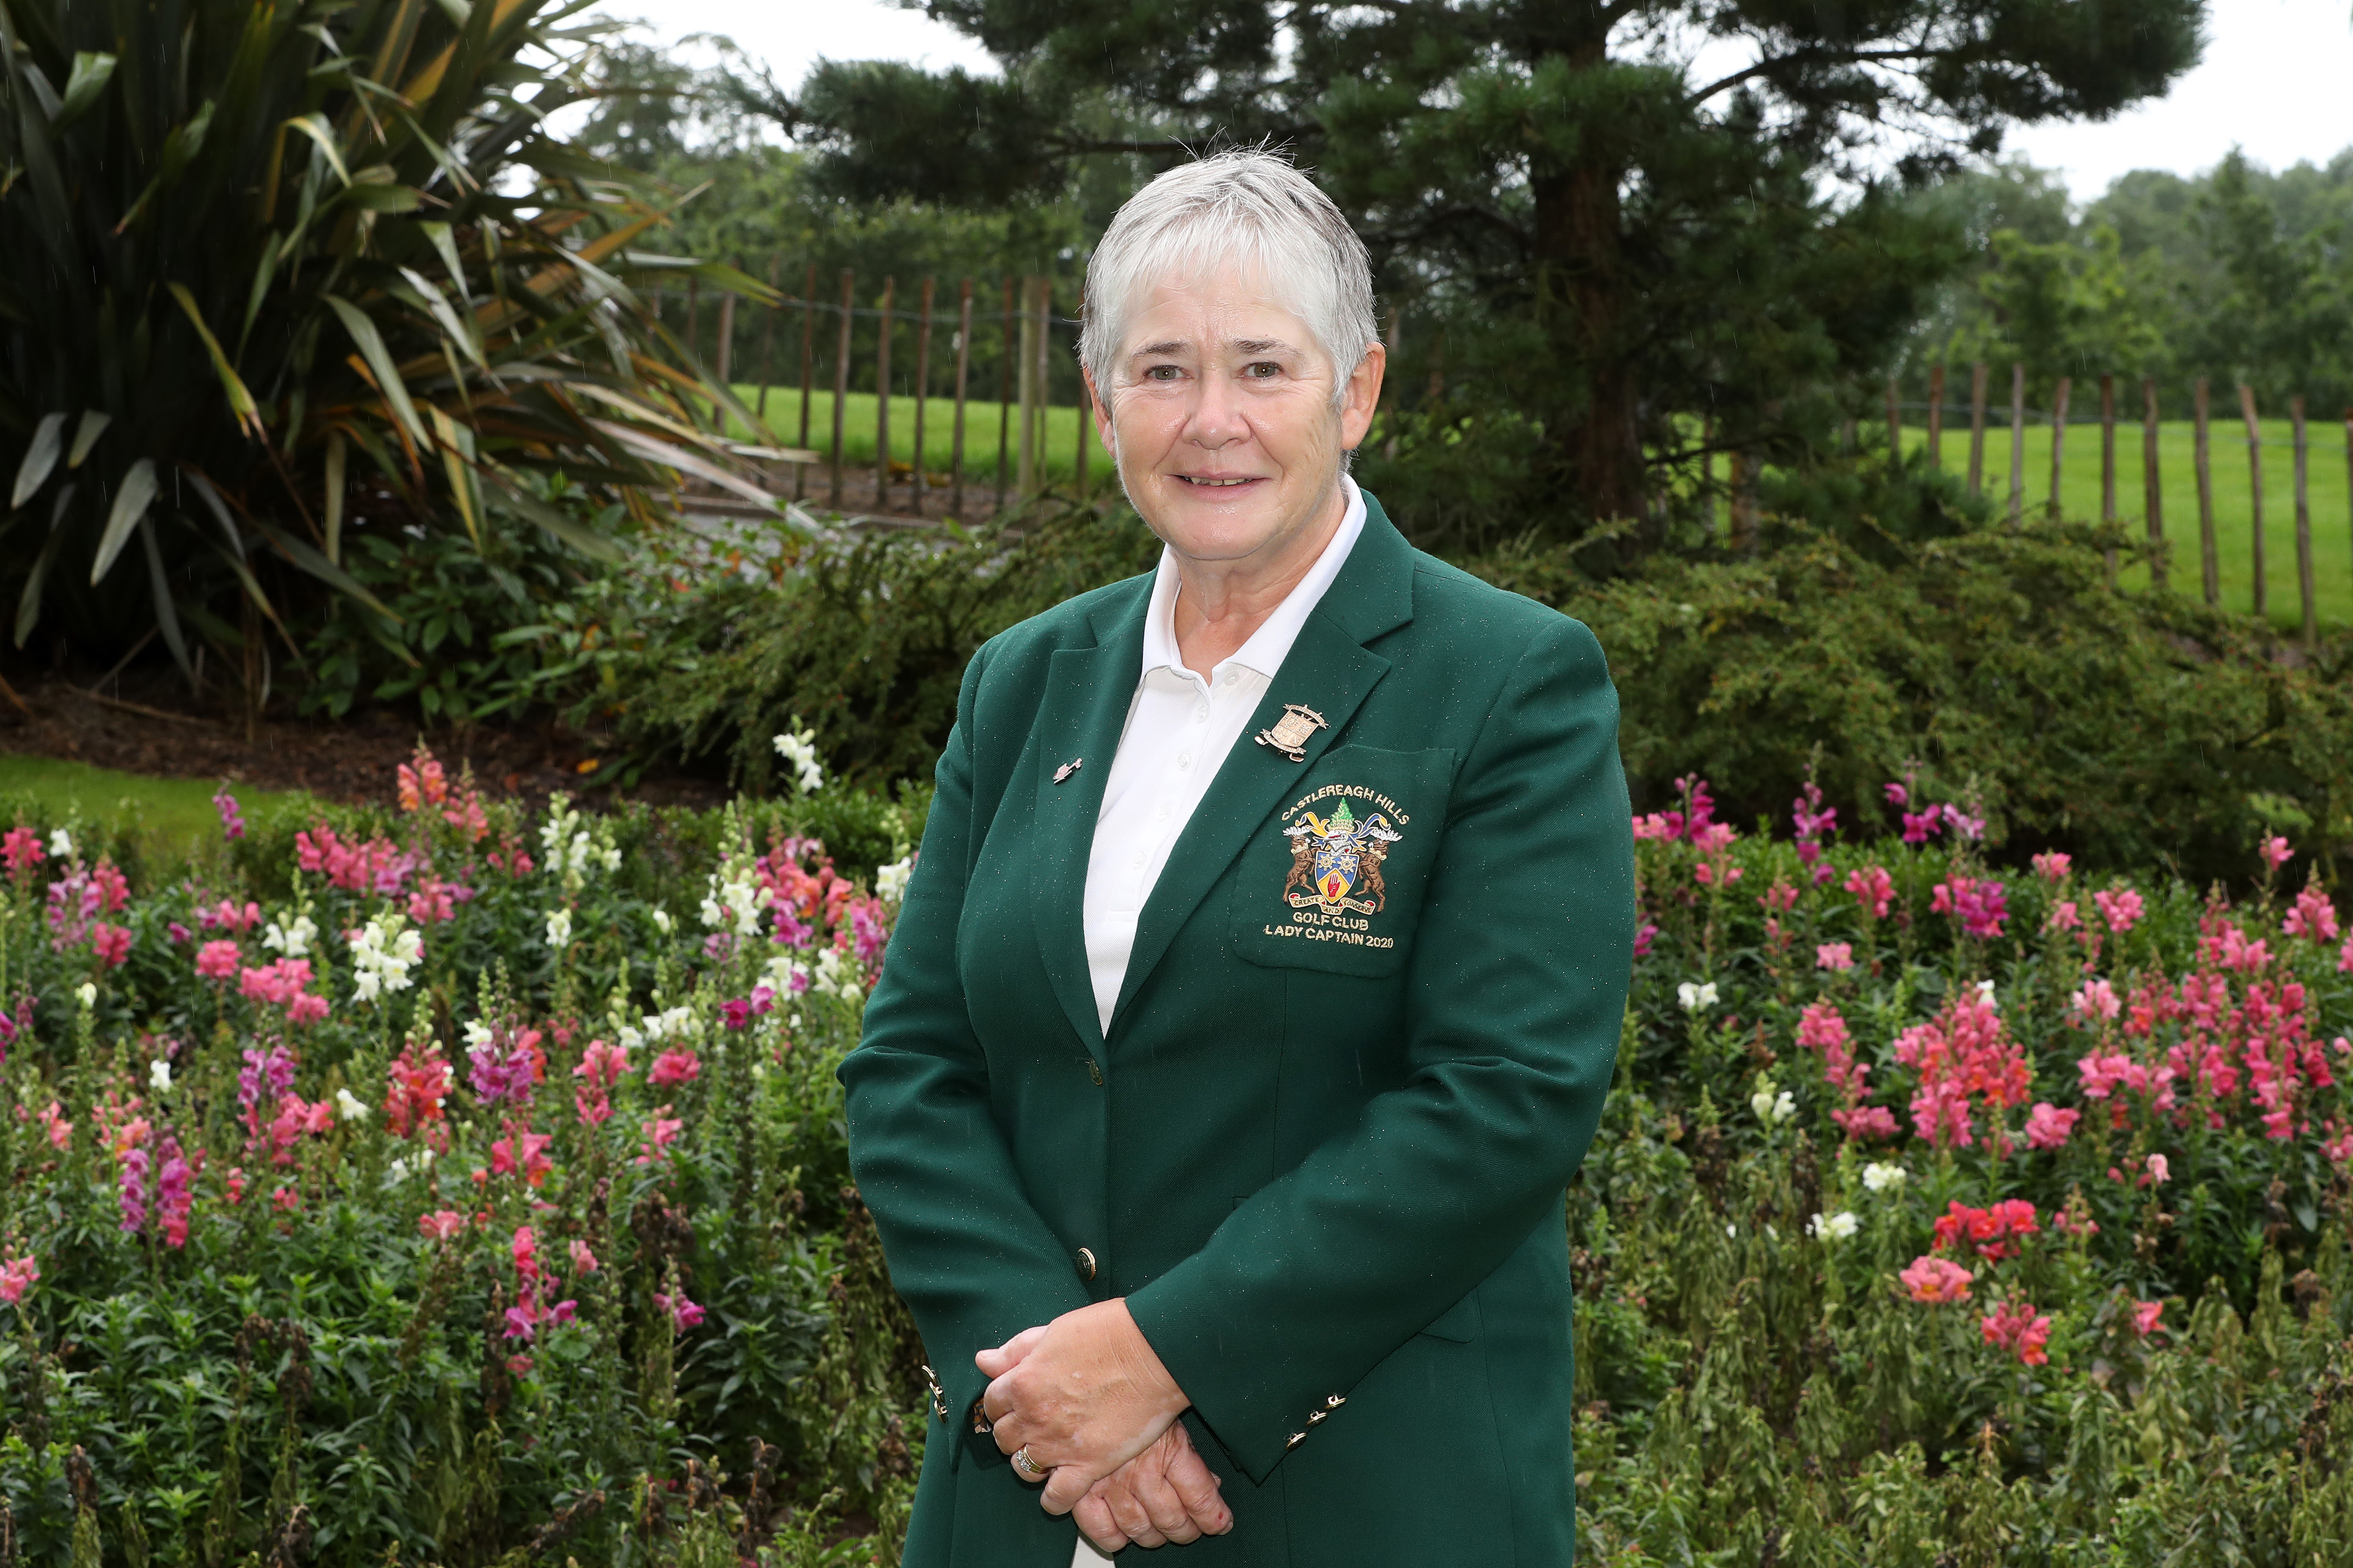 Lady Captain’s Day 2021